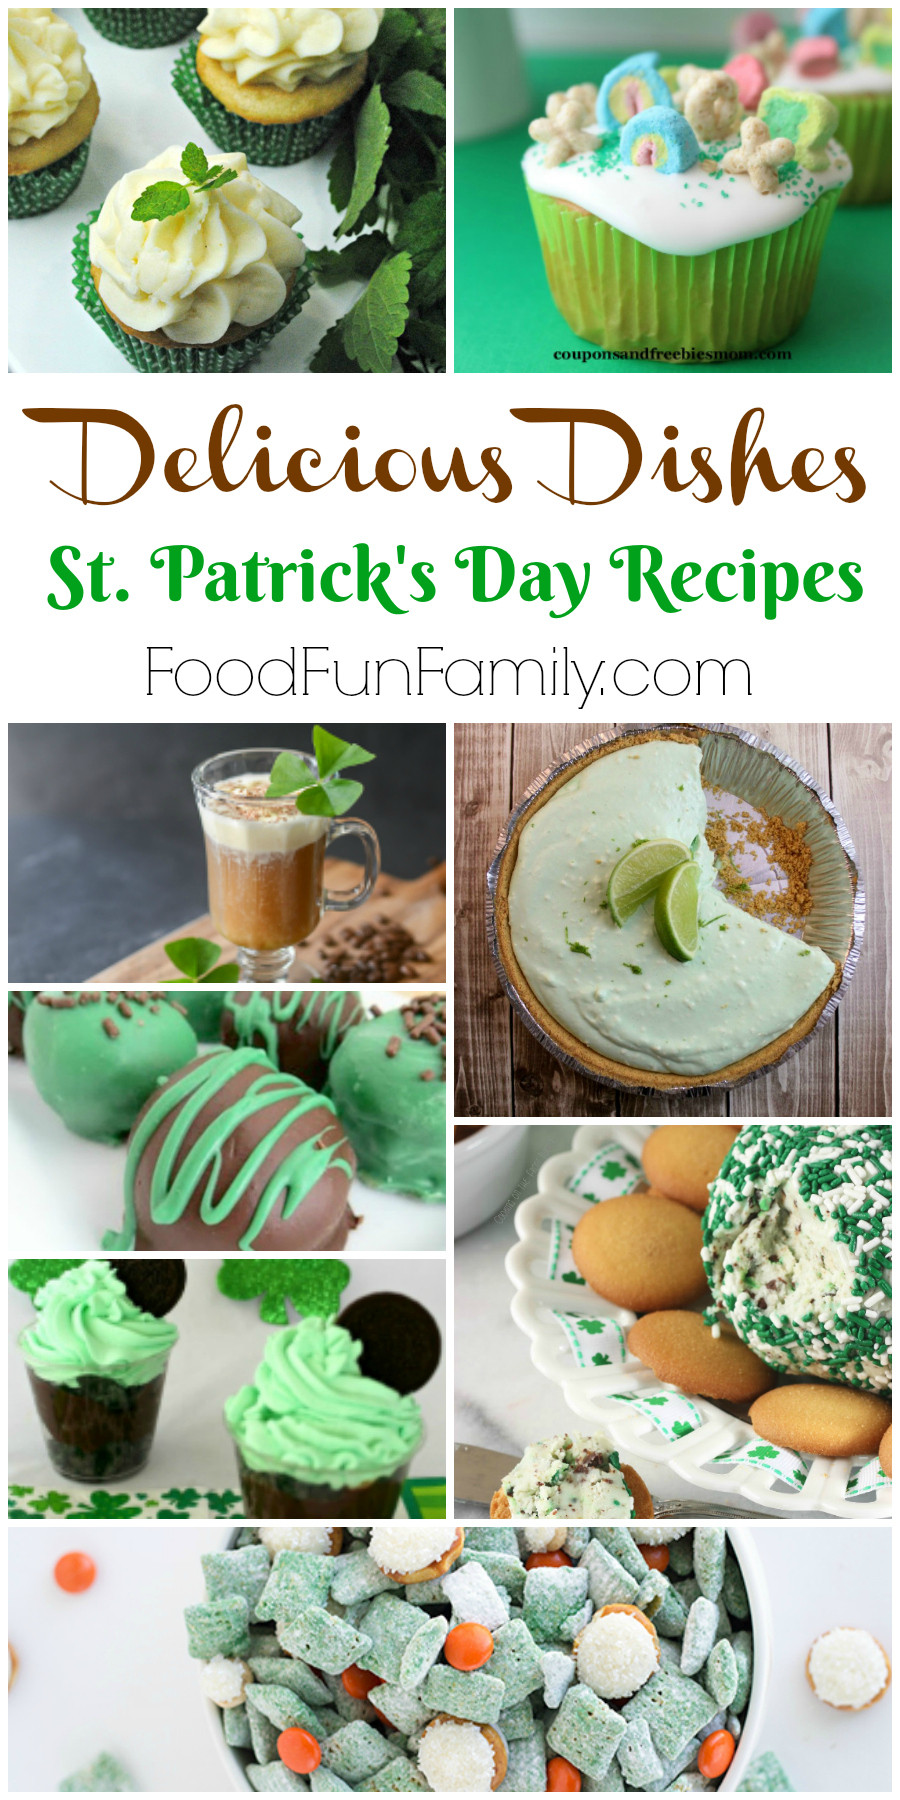 St Patrick's Day Party Food
 Festive St Patrick’s Day Recipes – Delicious Dishes